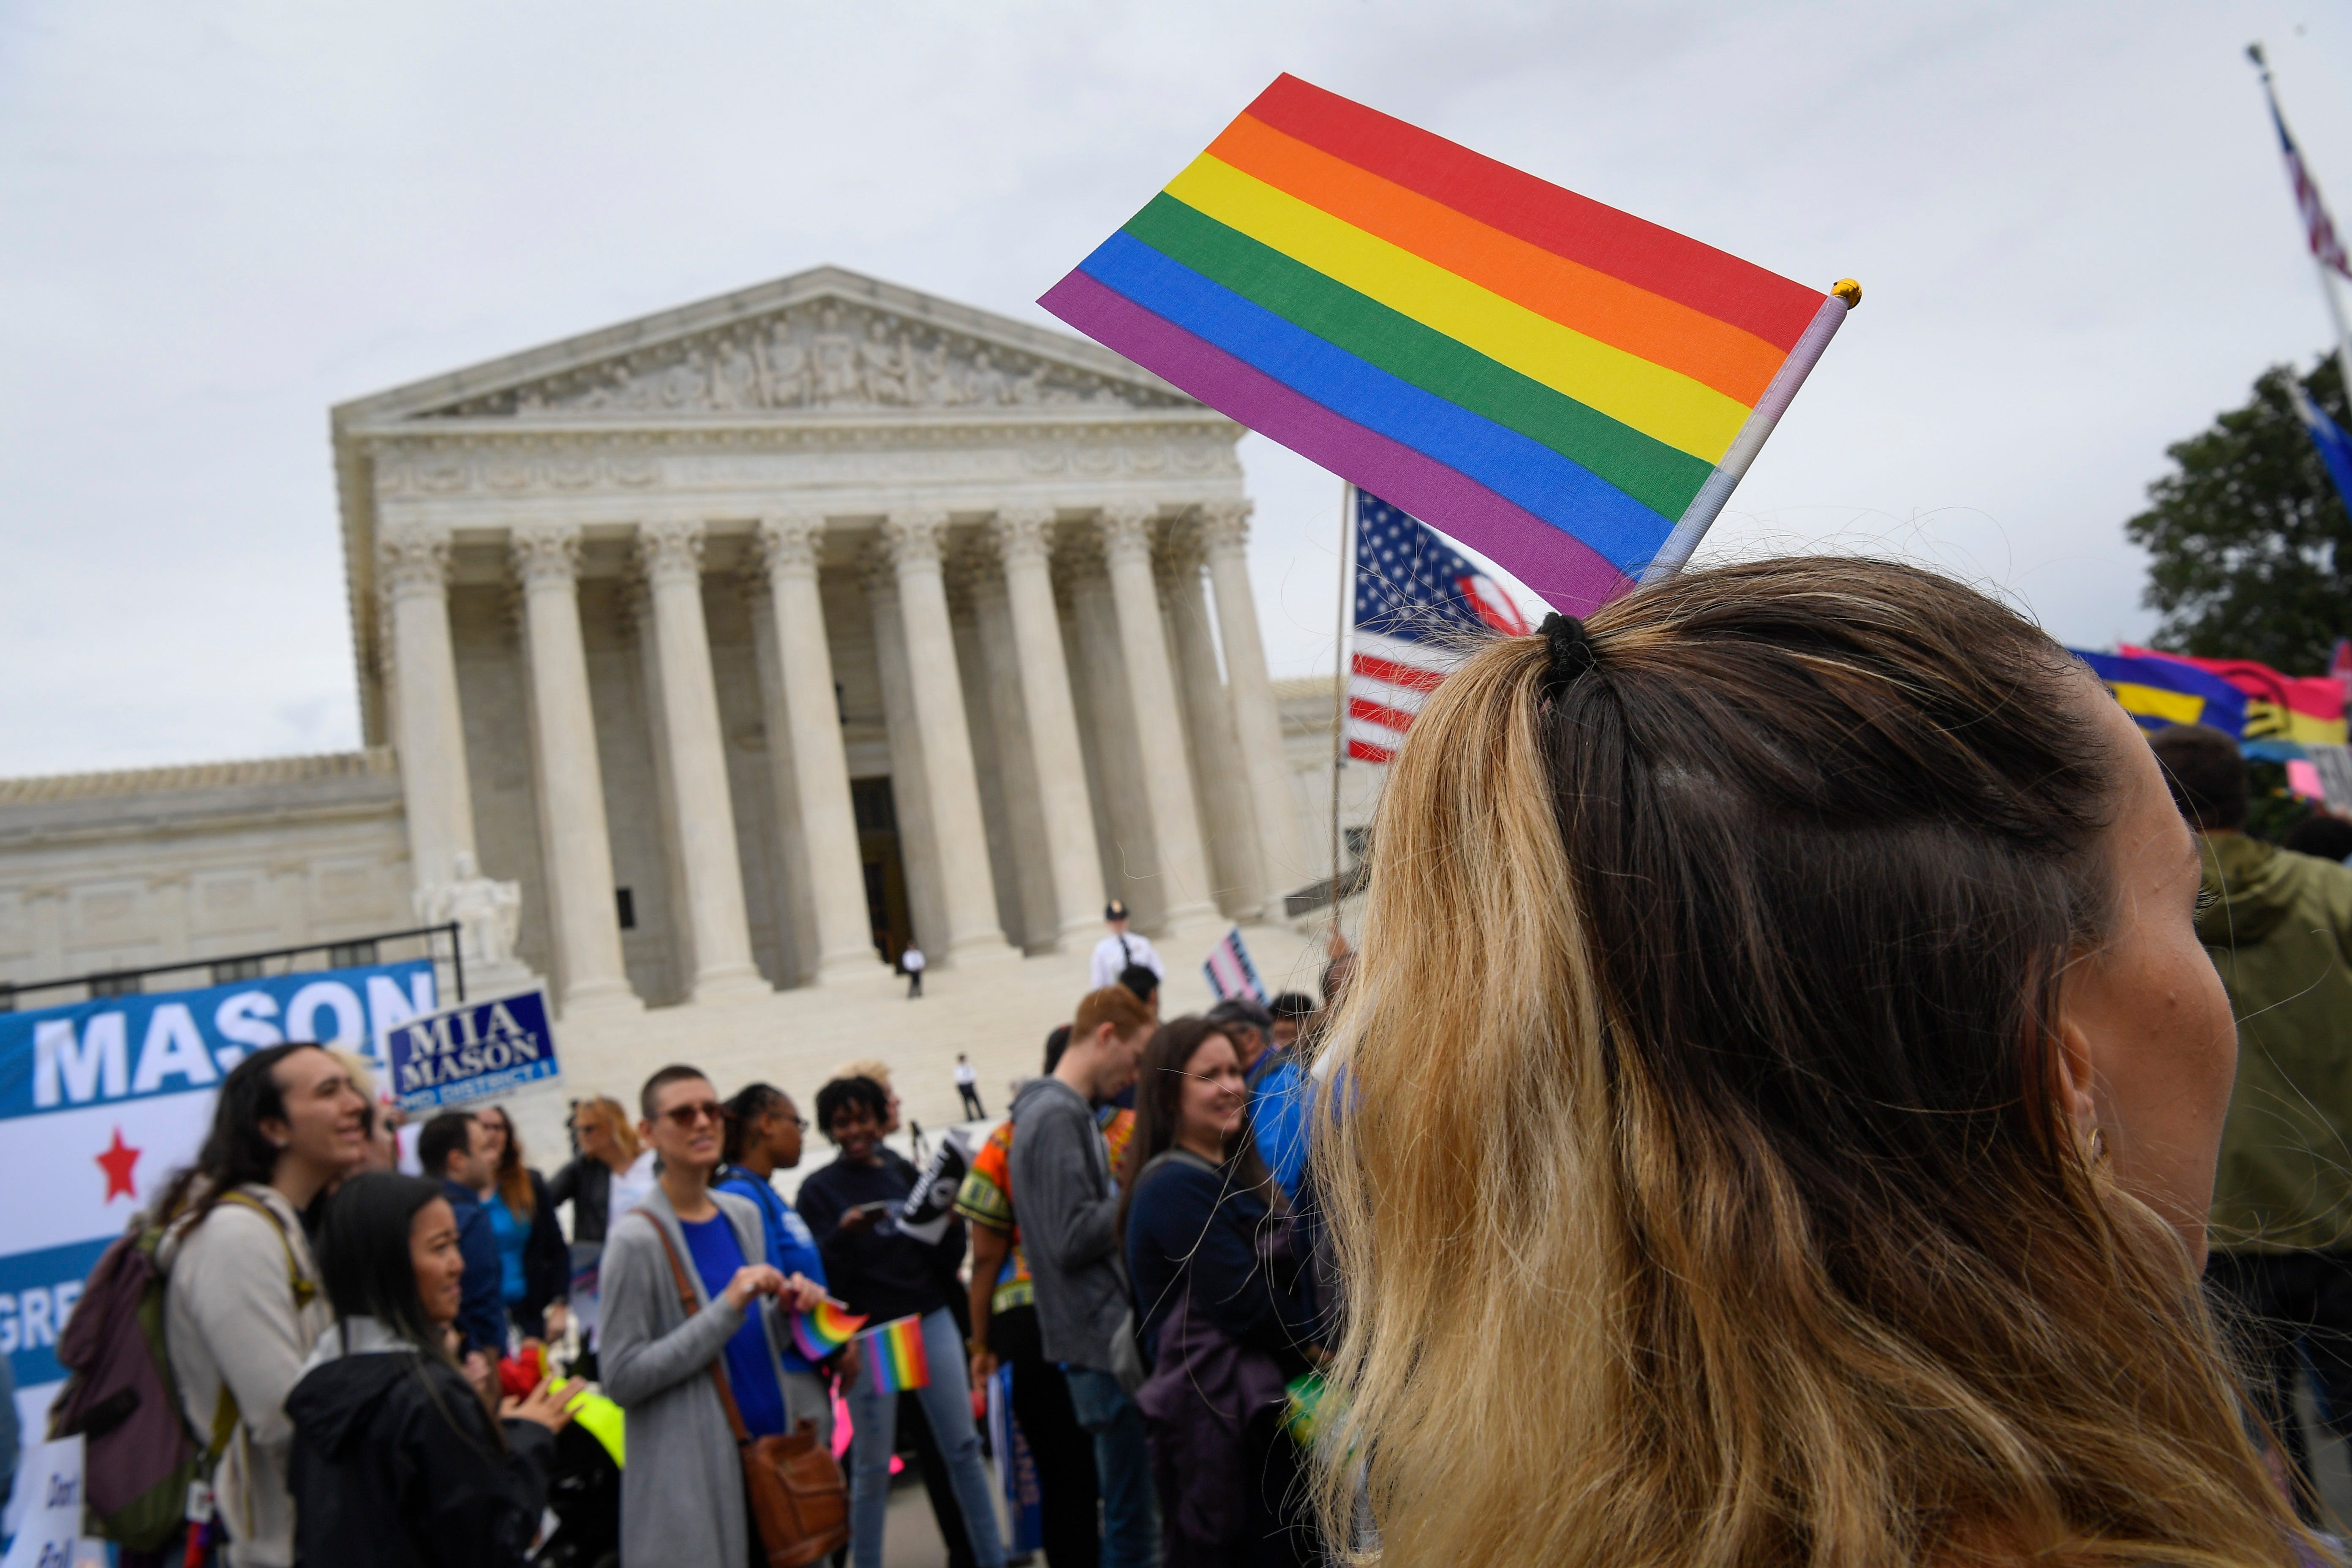 What does it mean for LGBT rights and where?